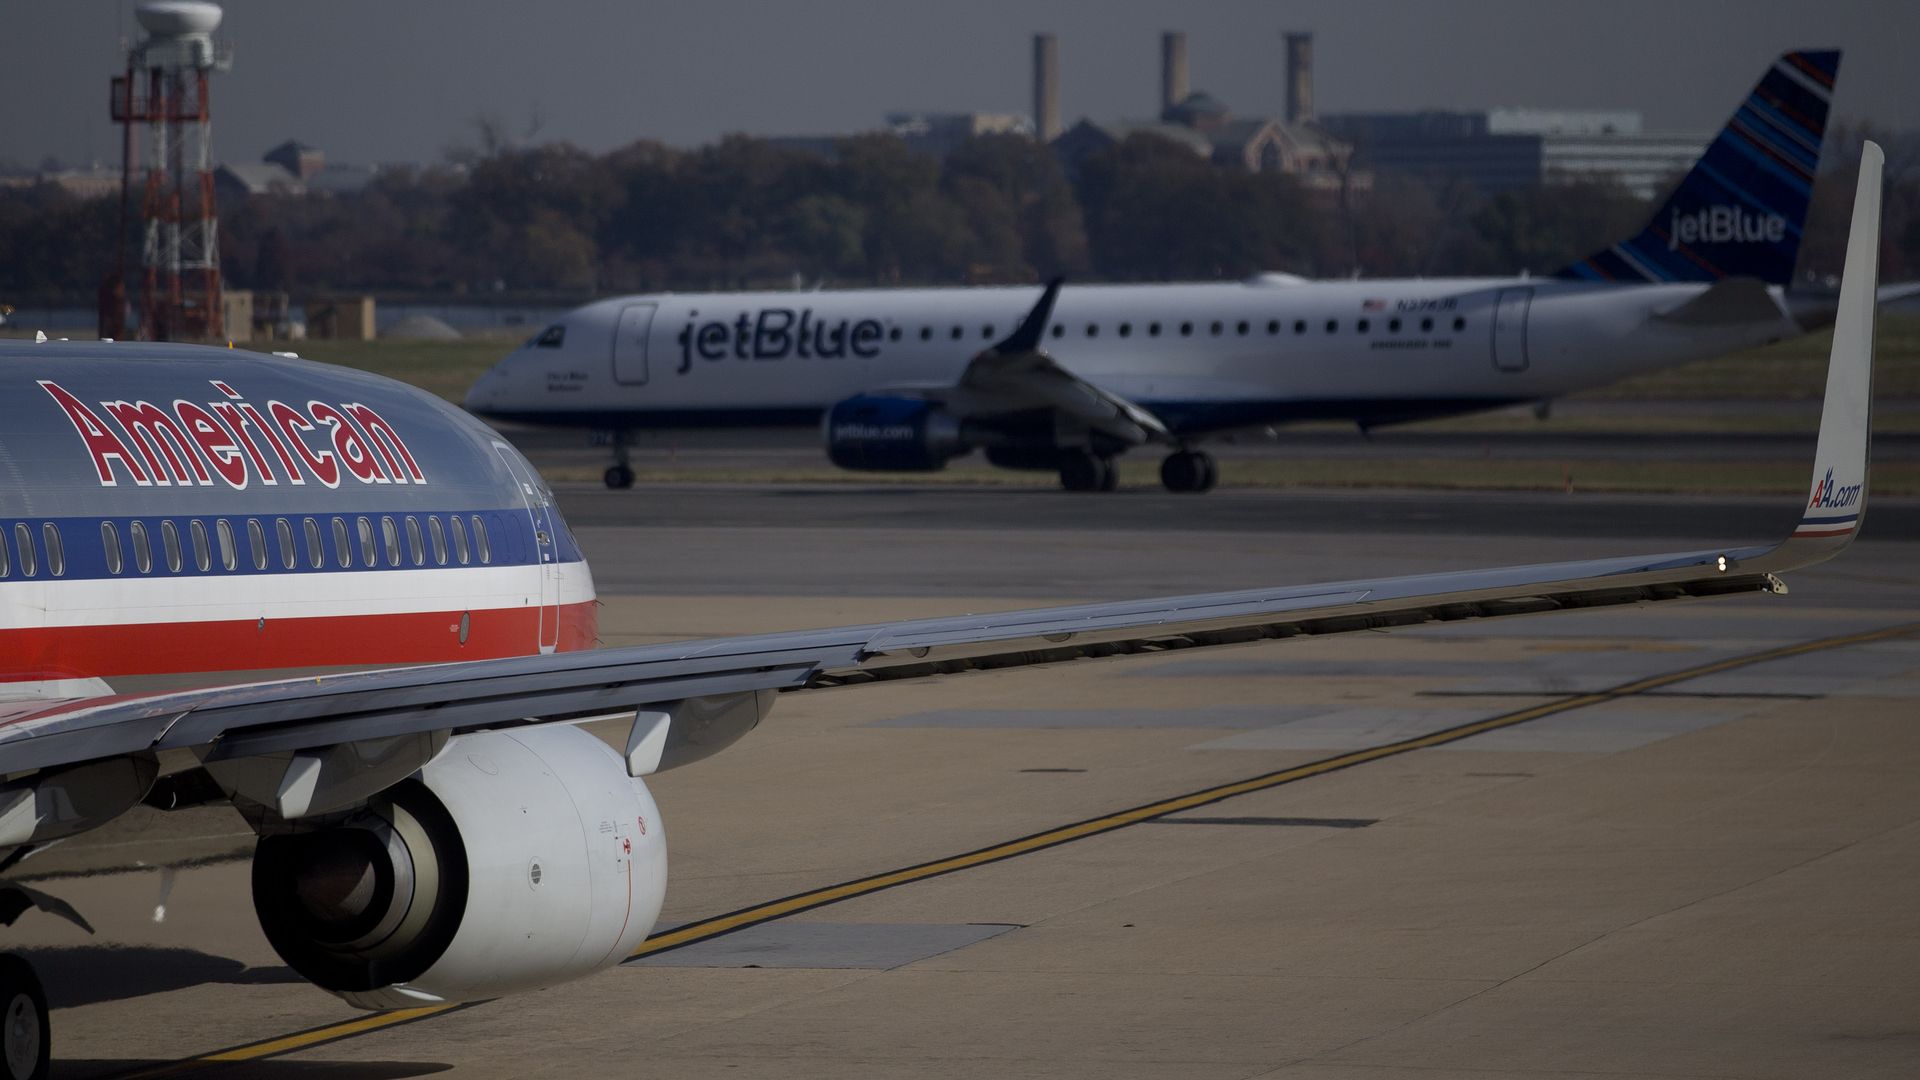 Photo of an American Airlines airplane facing a JetBlue airport on the ground